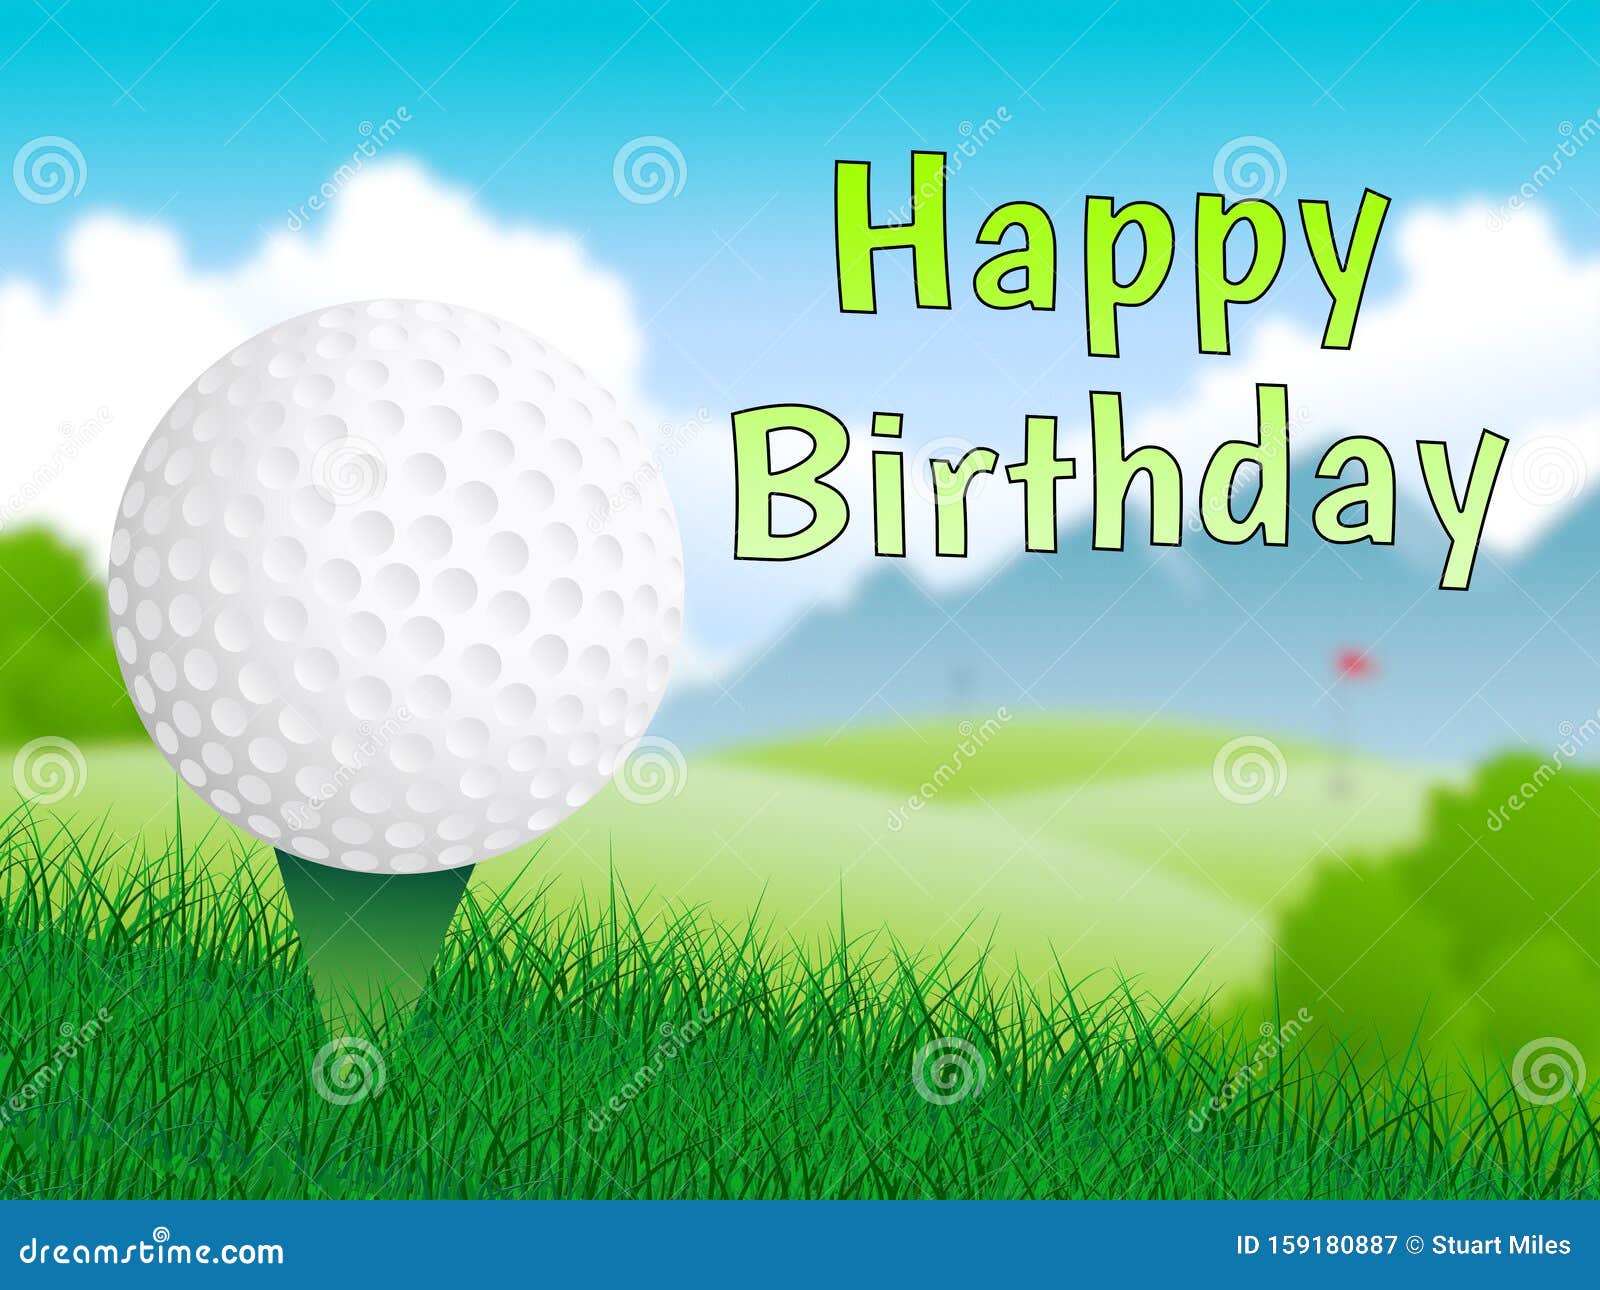 Happy Birthday Golf Message As Surprise Greeting for Golfer - 3d ...